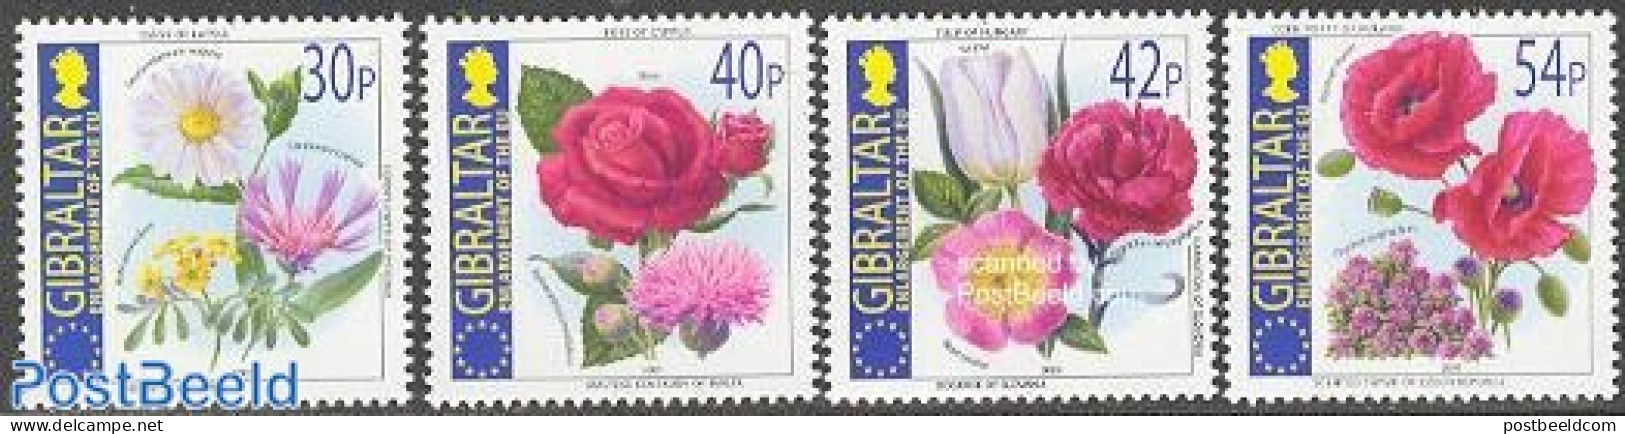 Gibraltar 2003 Enlargement Of The EU, Flowers 4v, Mint NH, History - Nature - Europa Hang-on Issues - Flowers & Plants.. - European Ideas